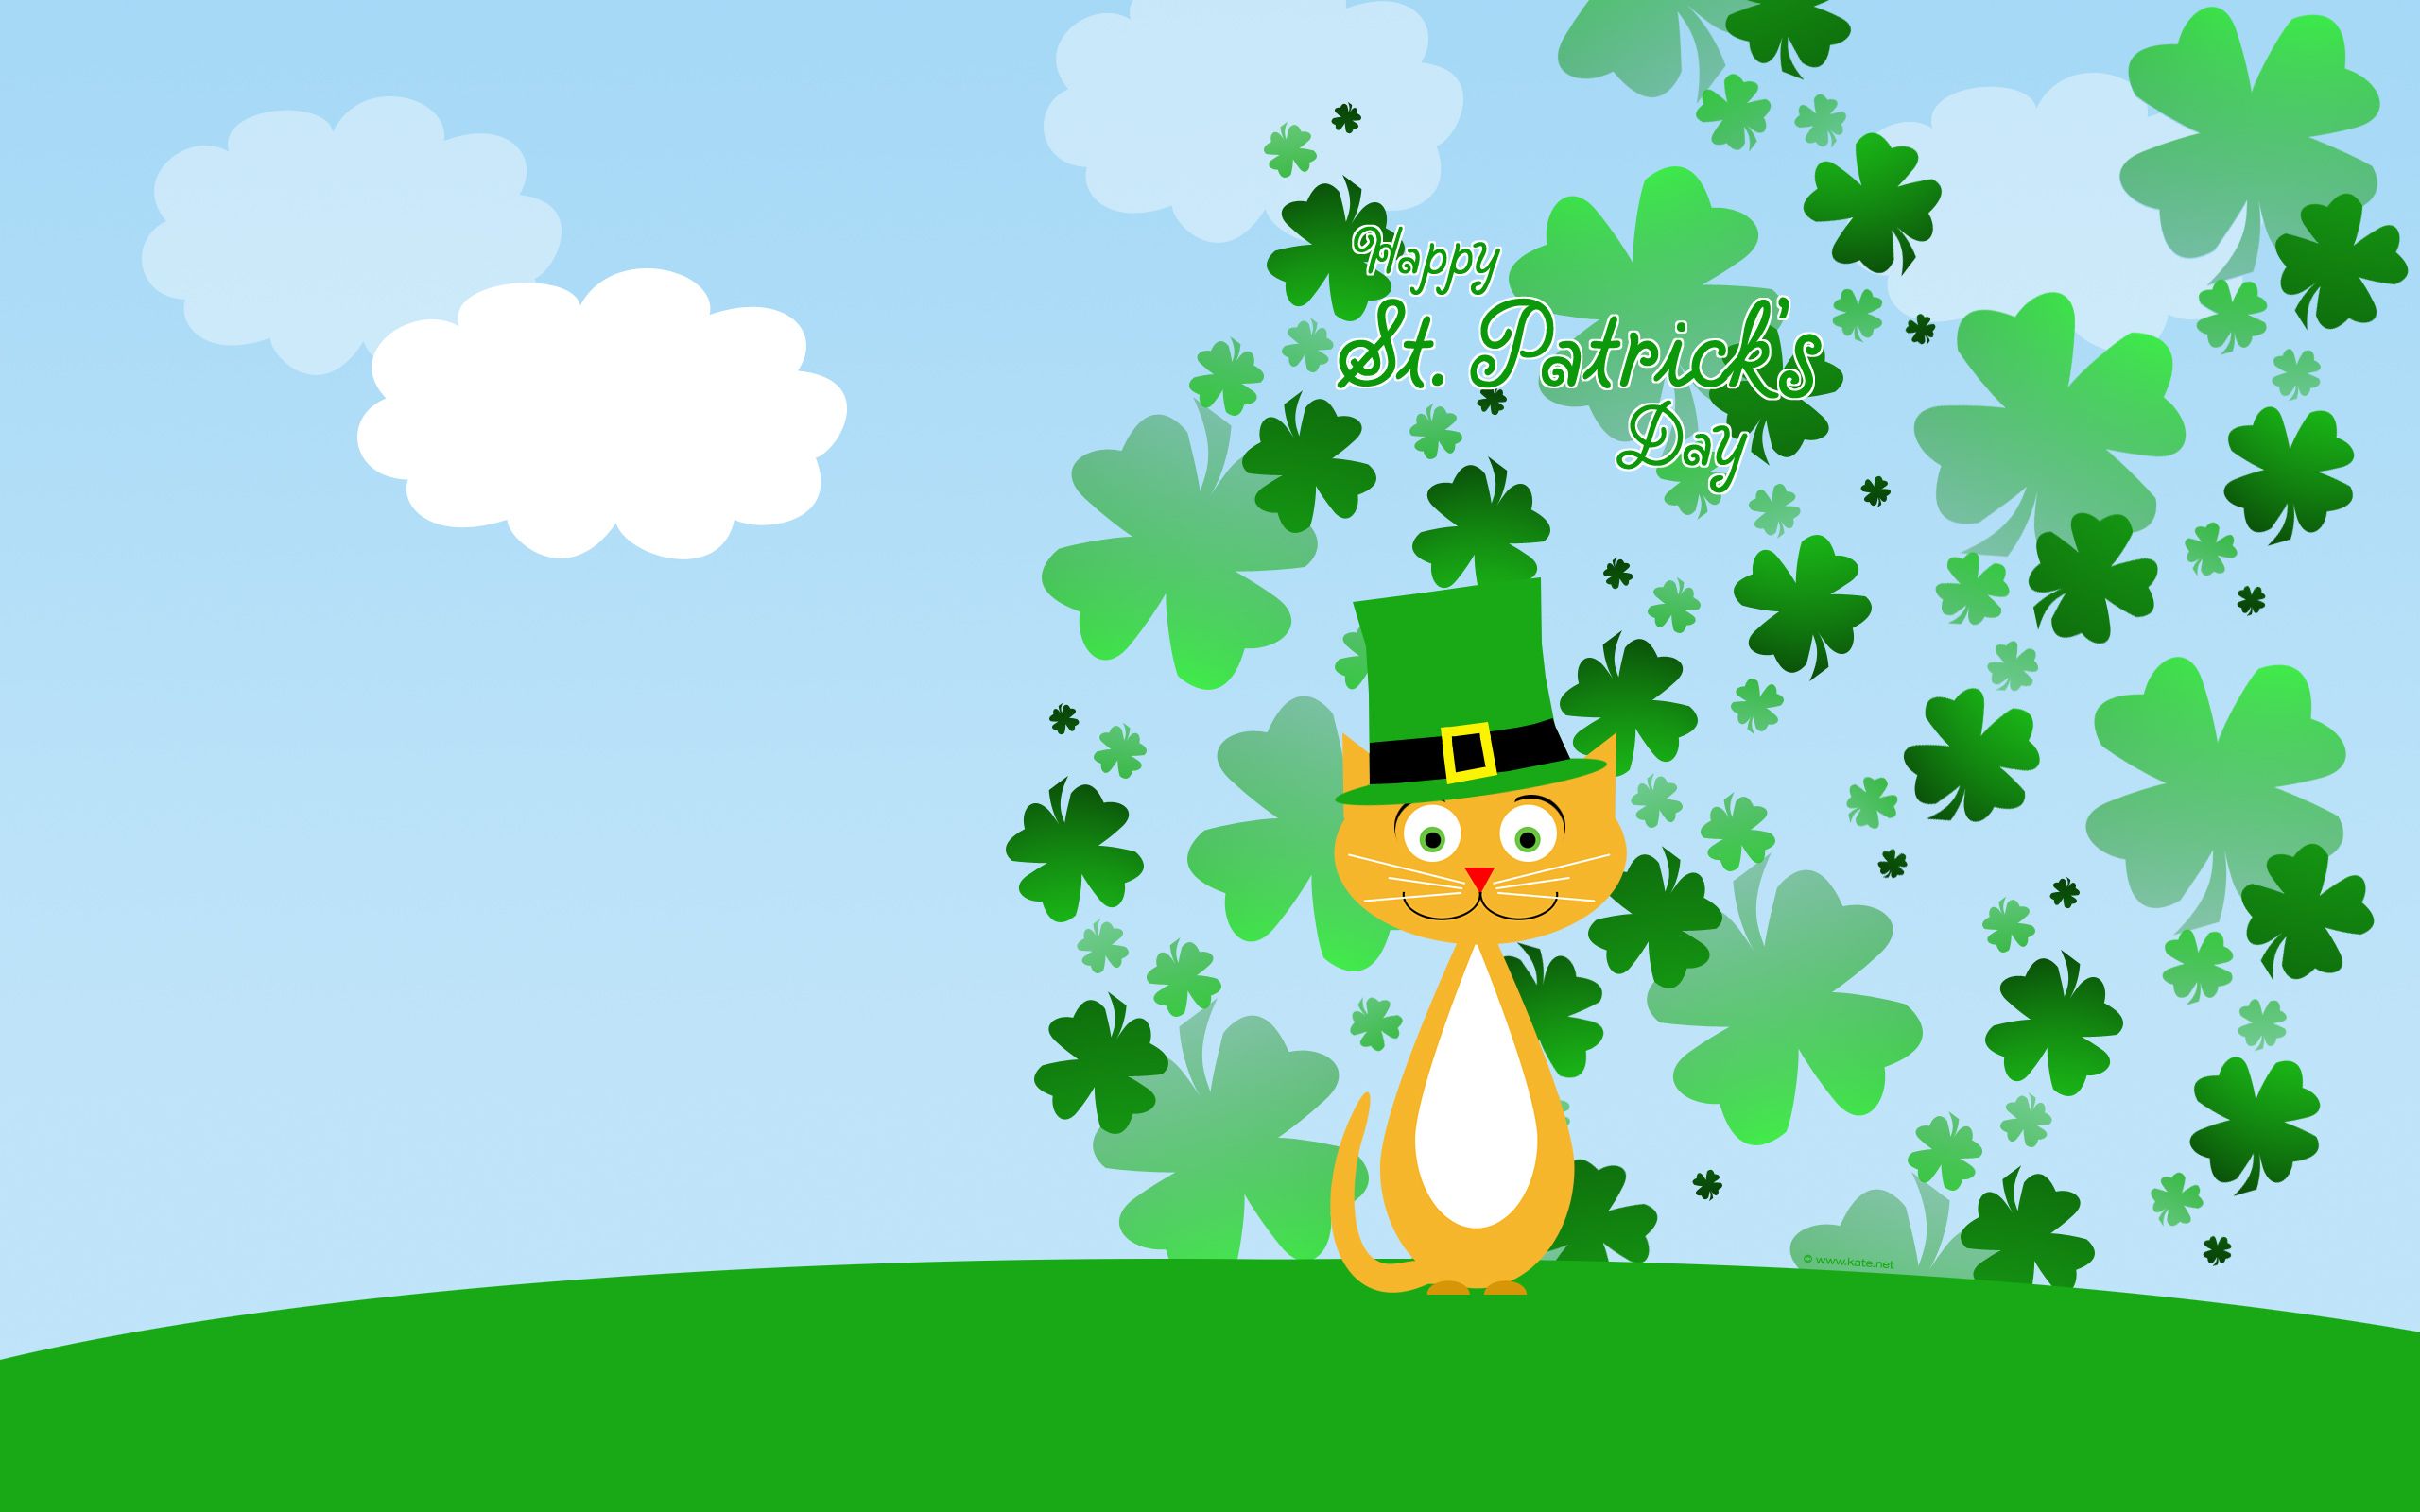 St. Patricks Day Wallpapers by Kate.net